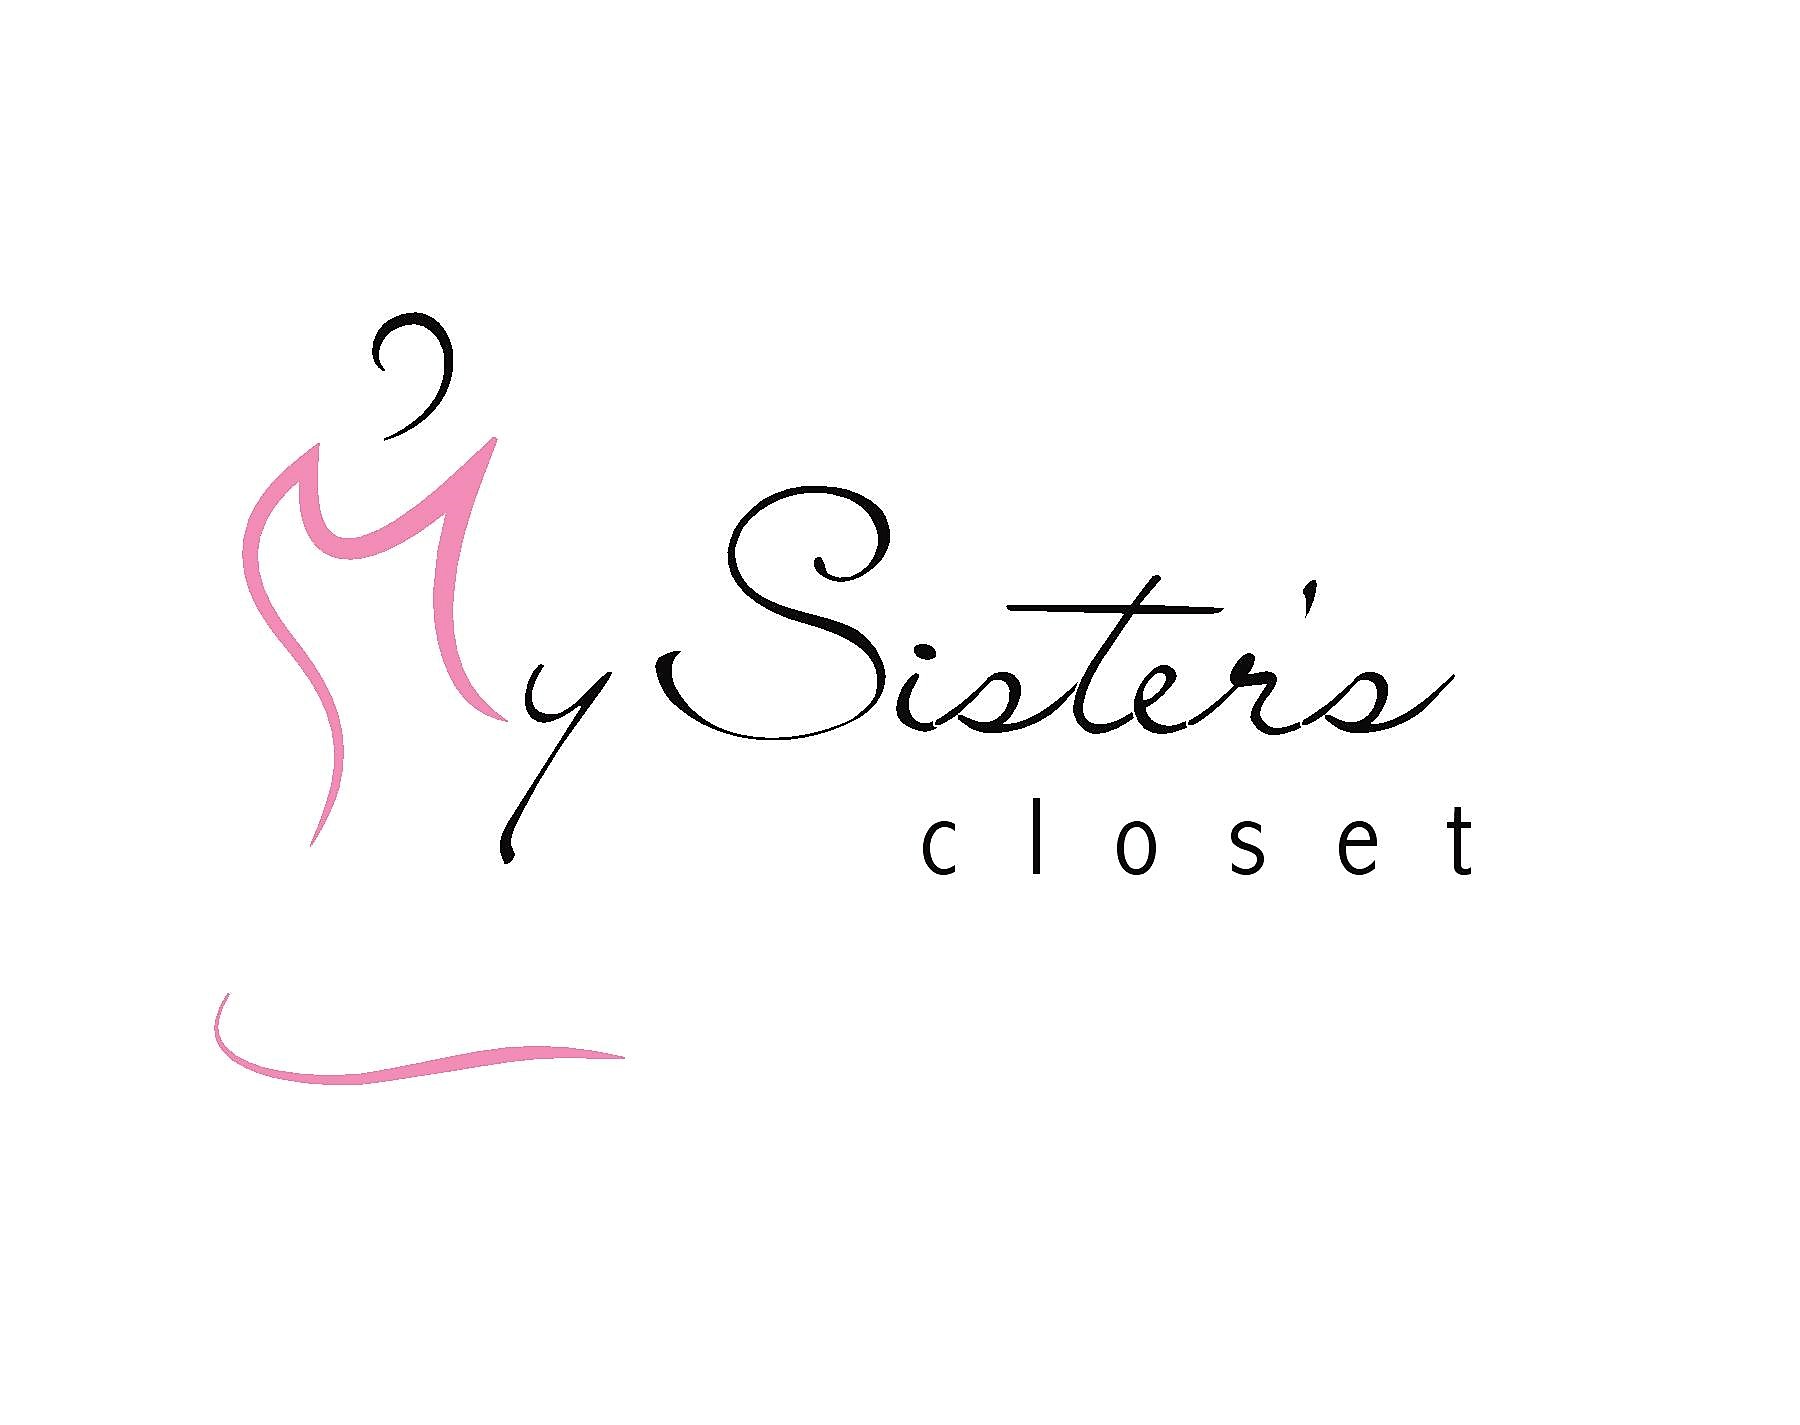 About  My Sister's Closet